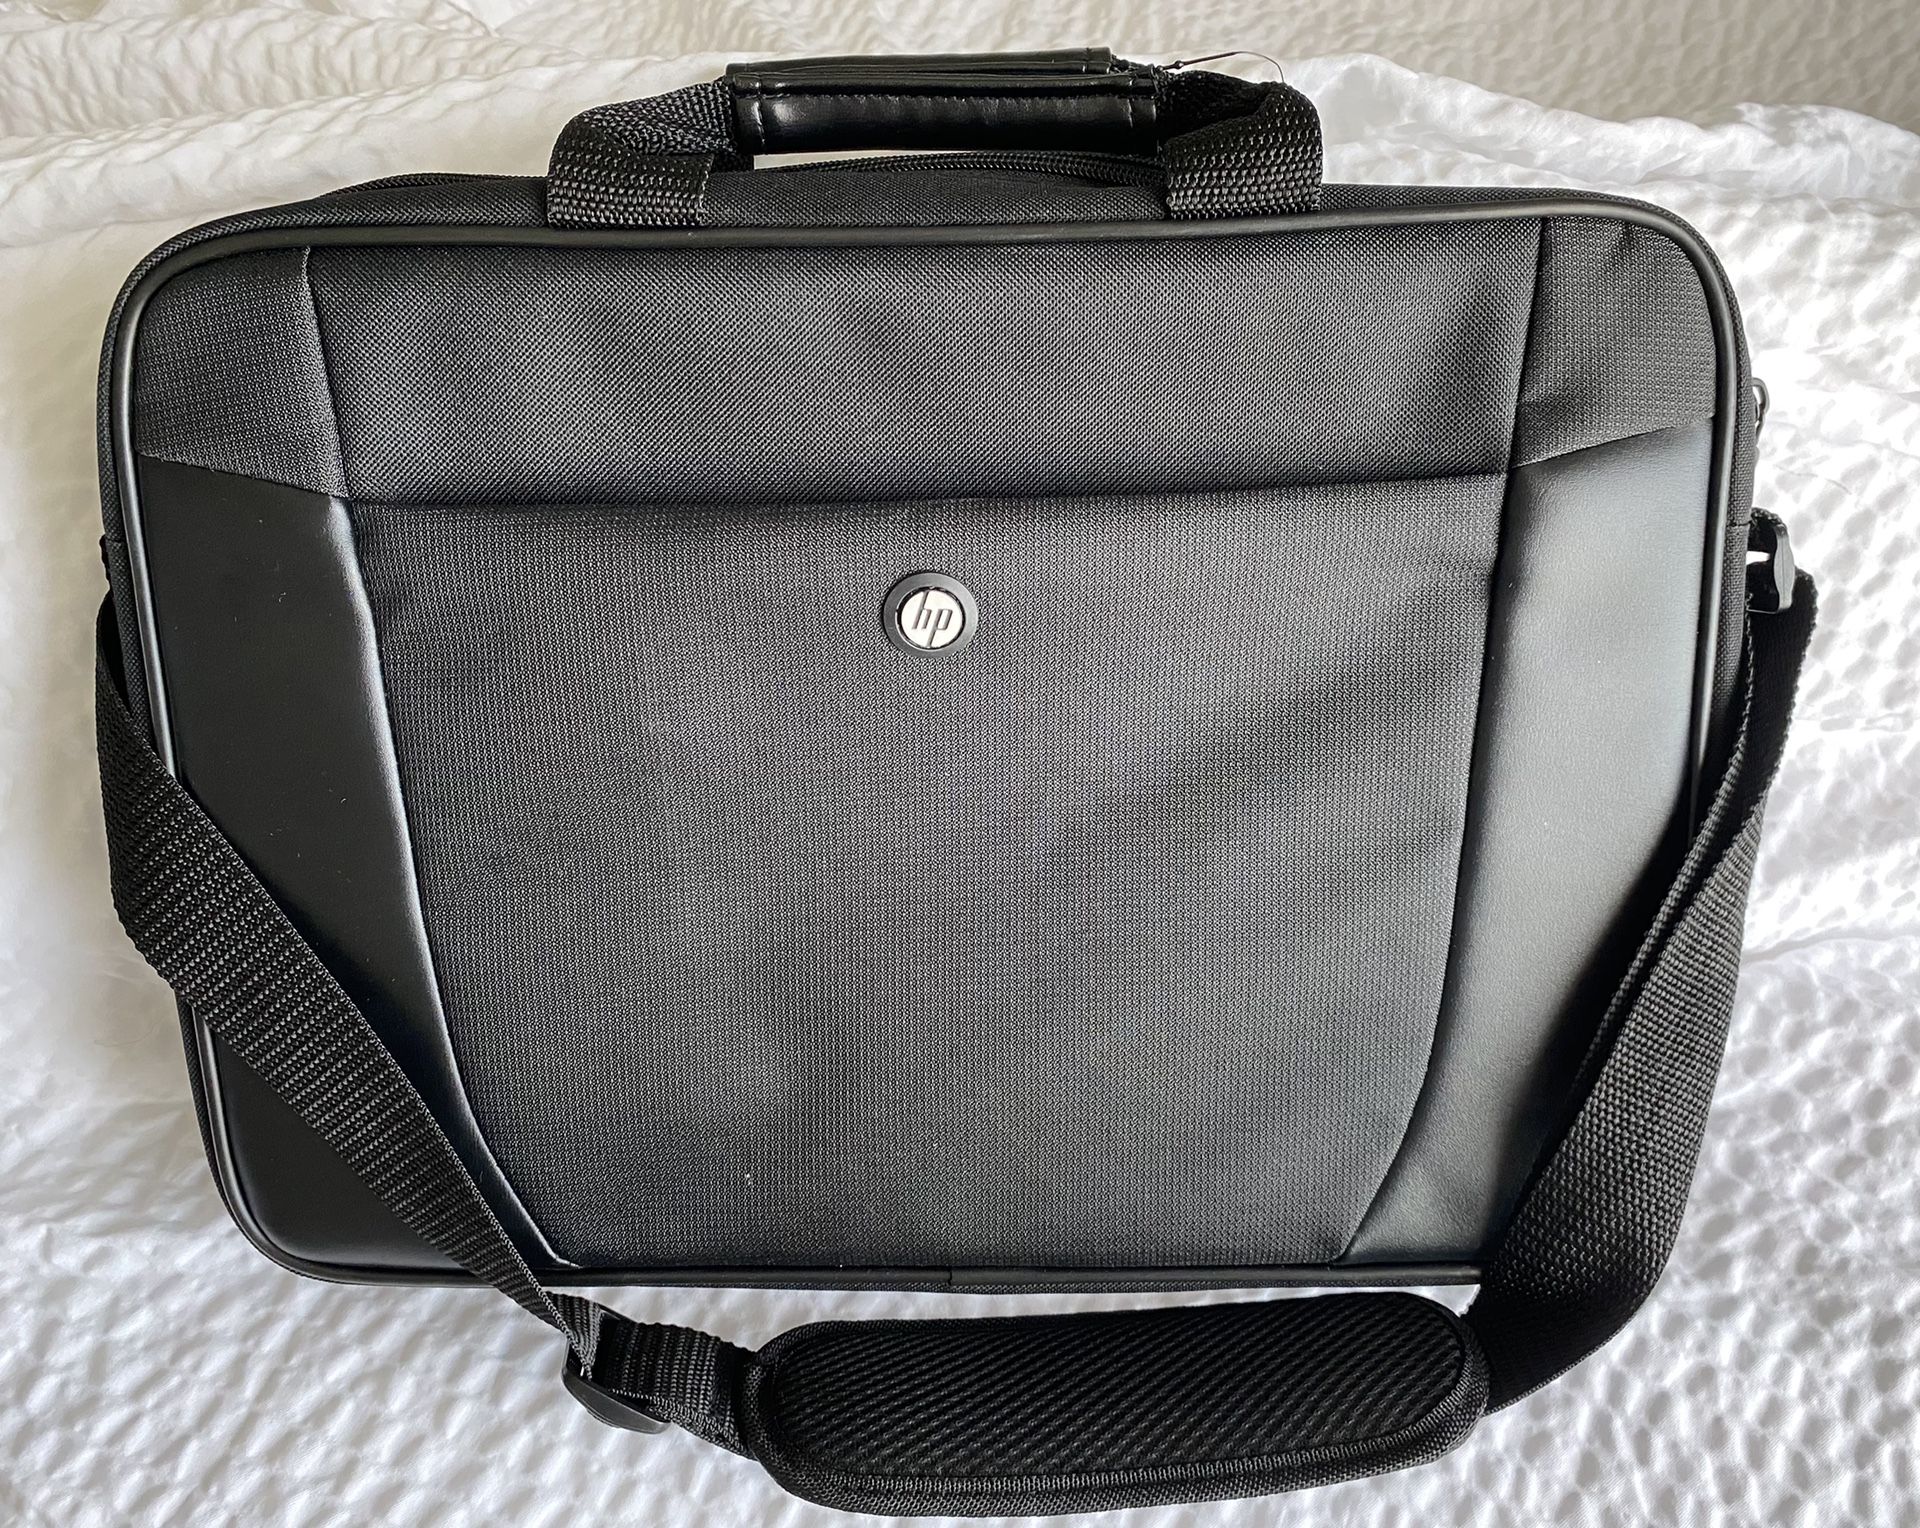 HP 15.6” Notebook Carrying Case